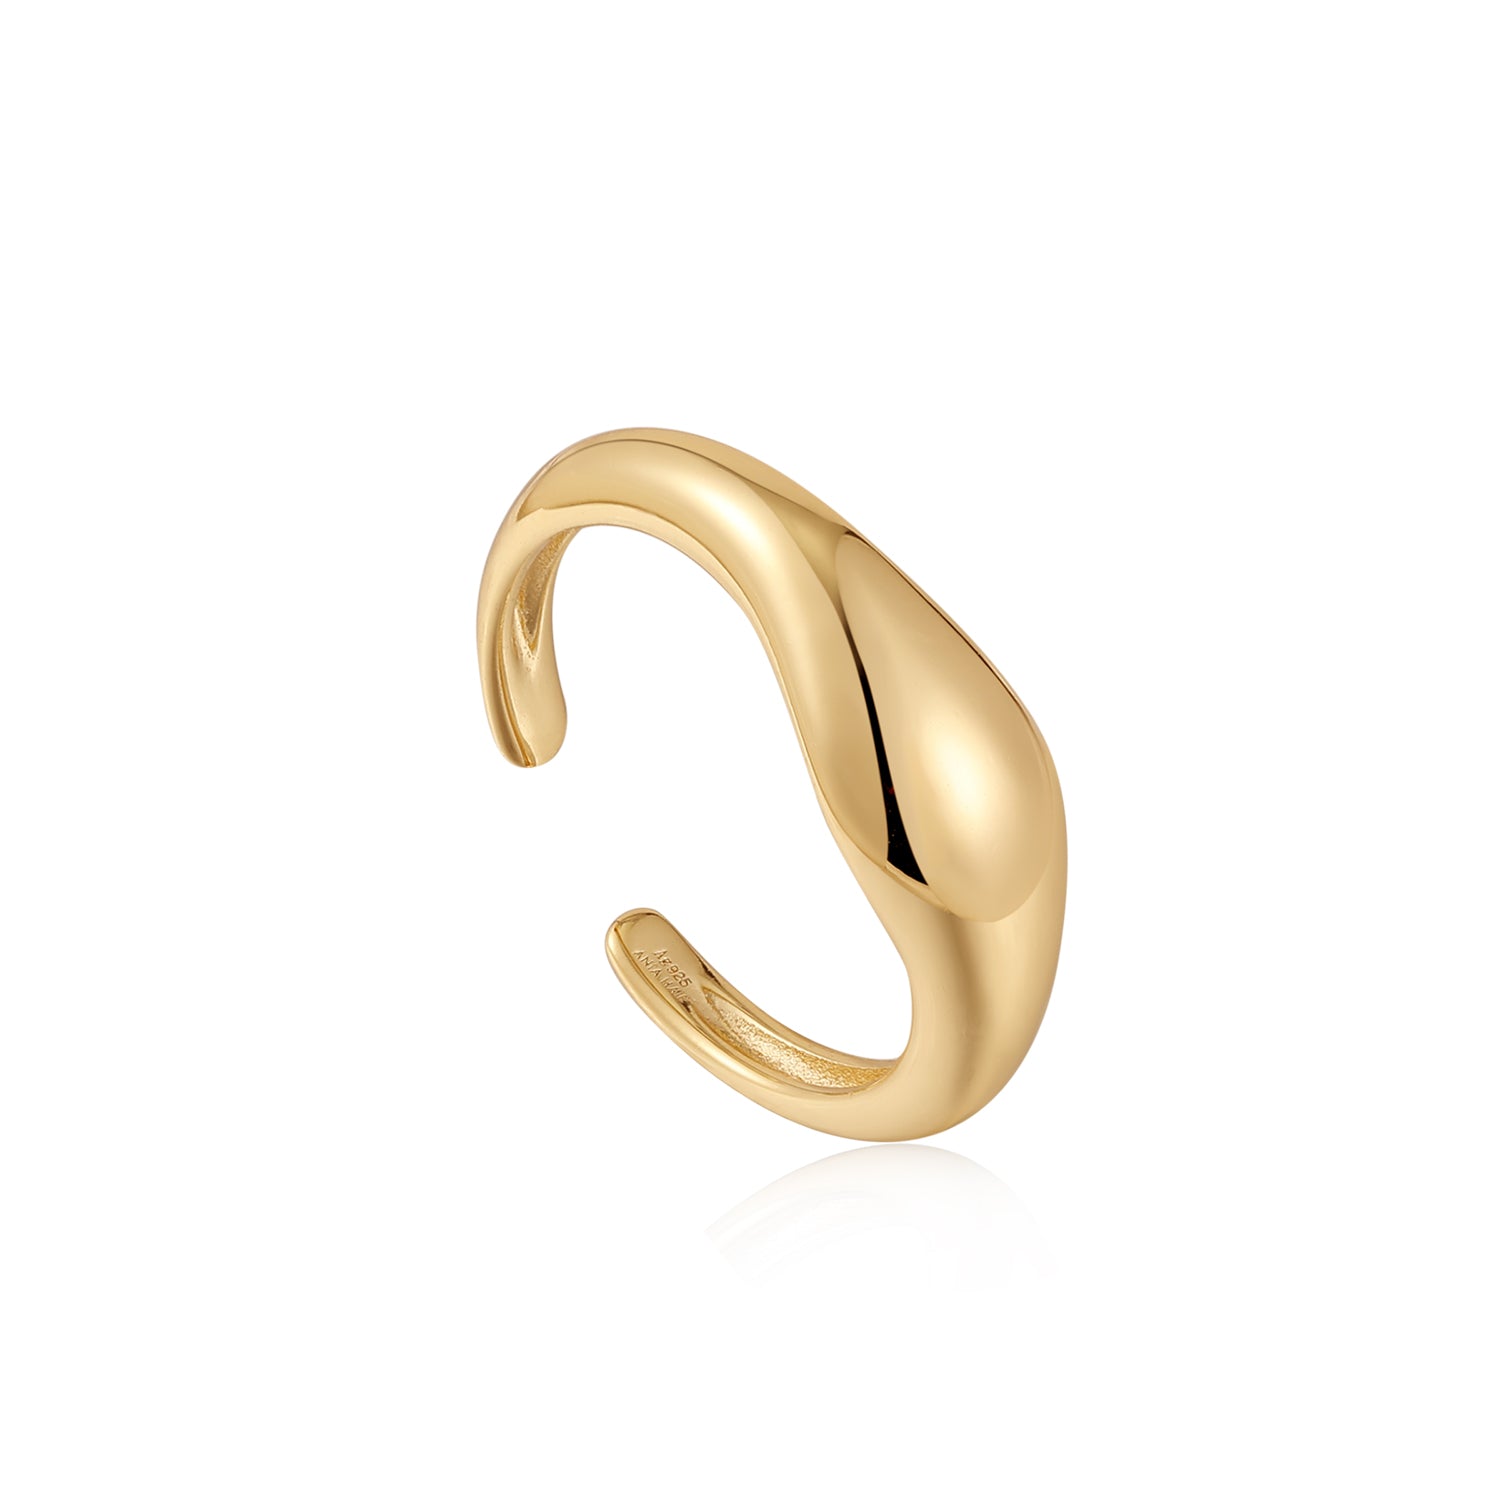 Shankh shaped adjustable ring with intricate design – Odara Jewellery